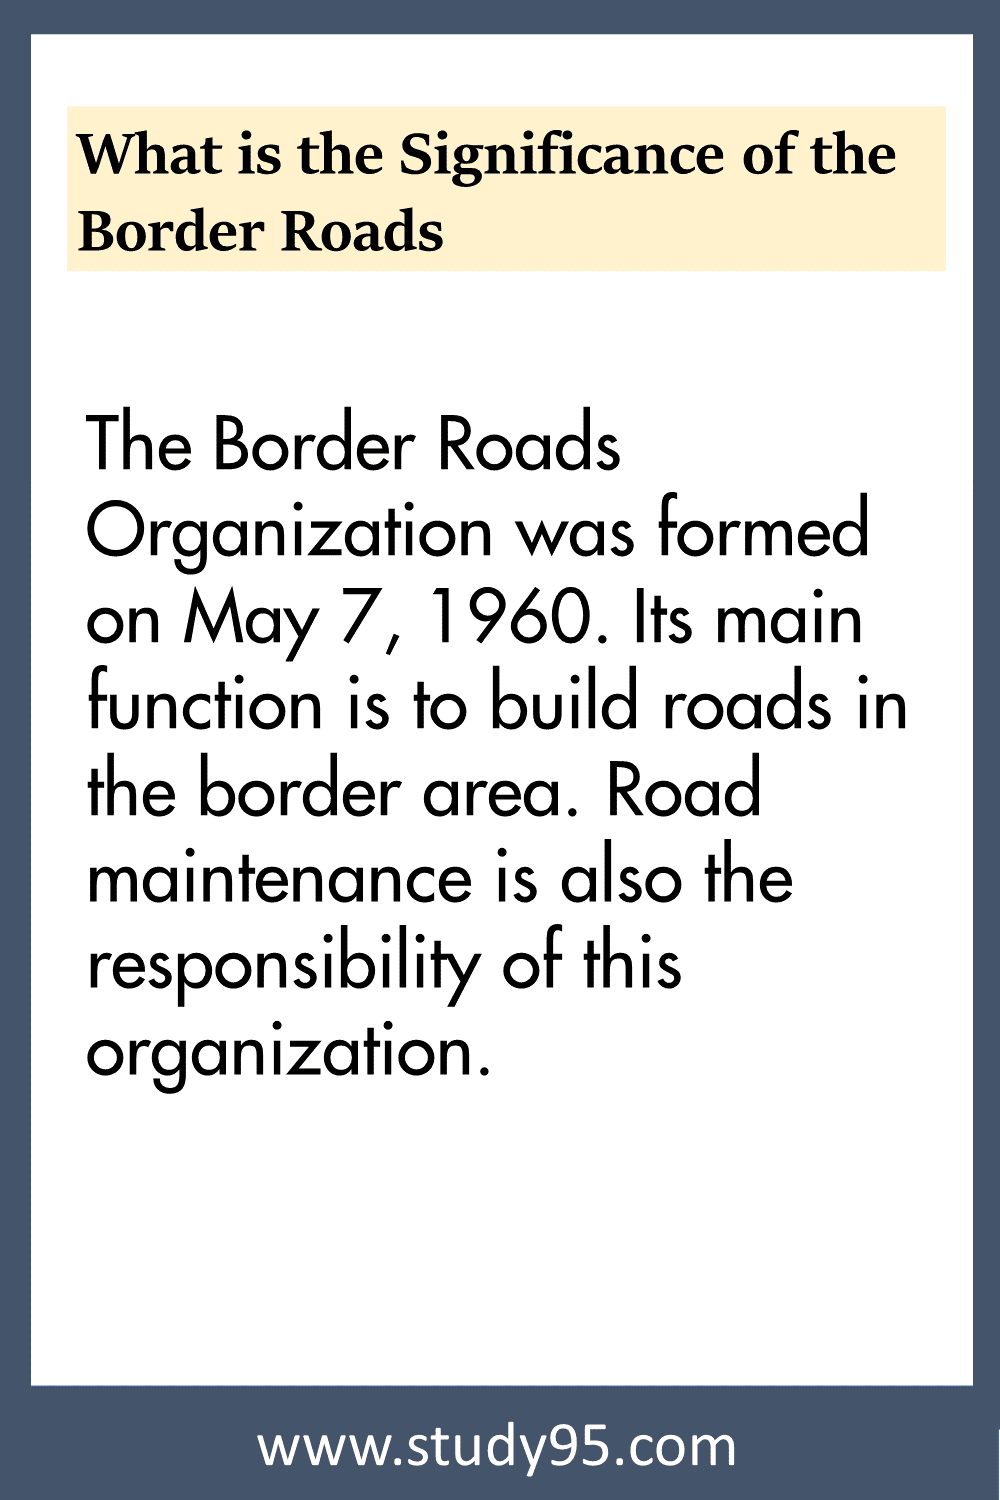 Significance of the Border Roads